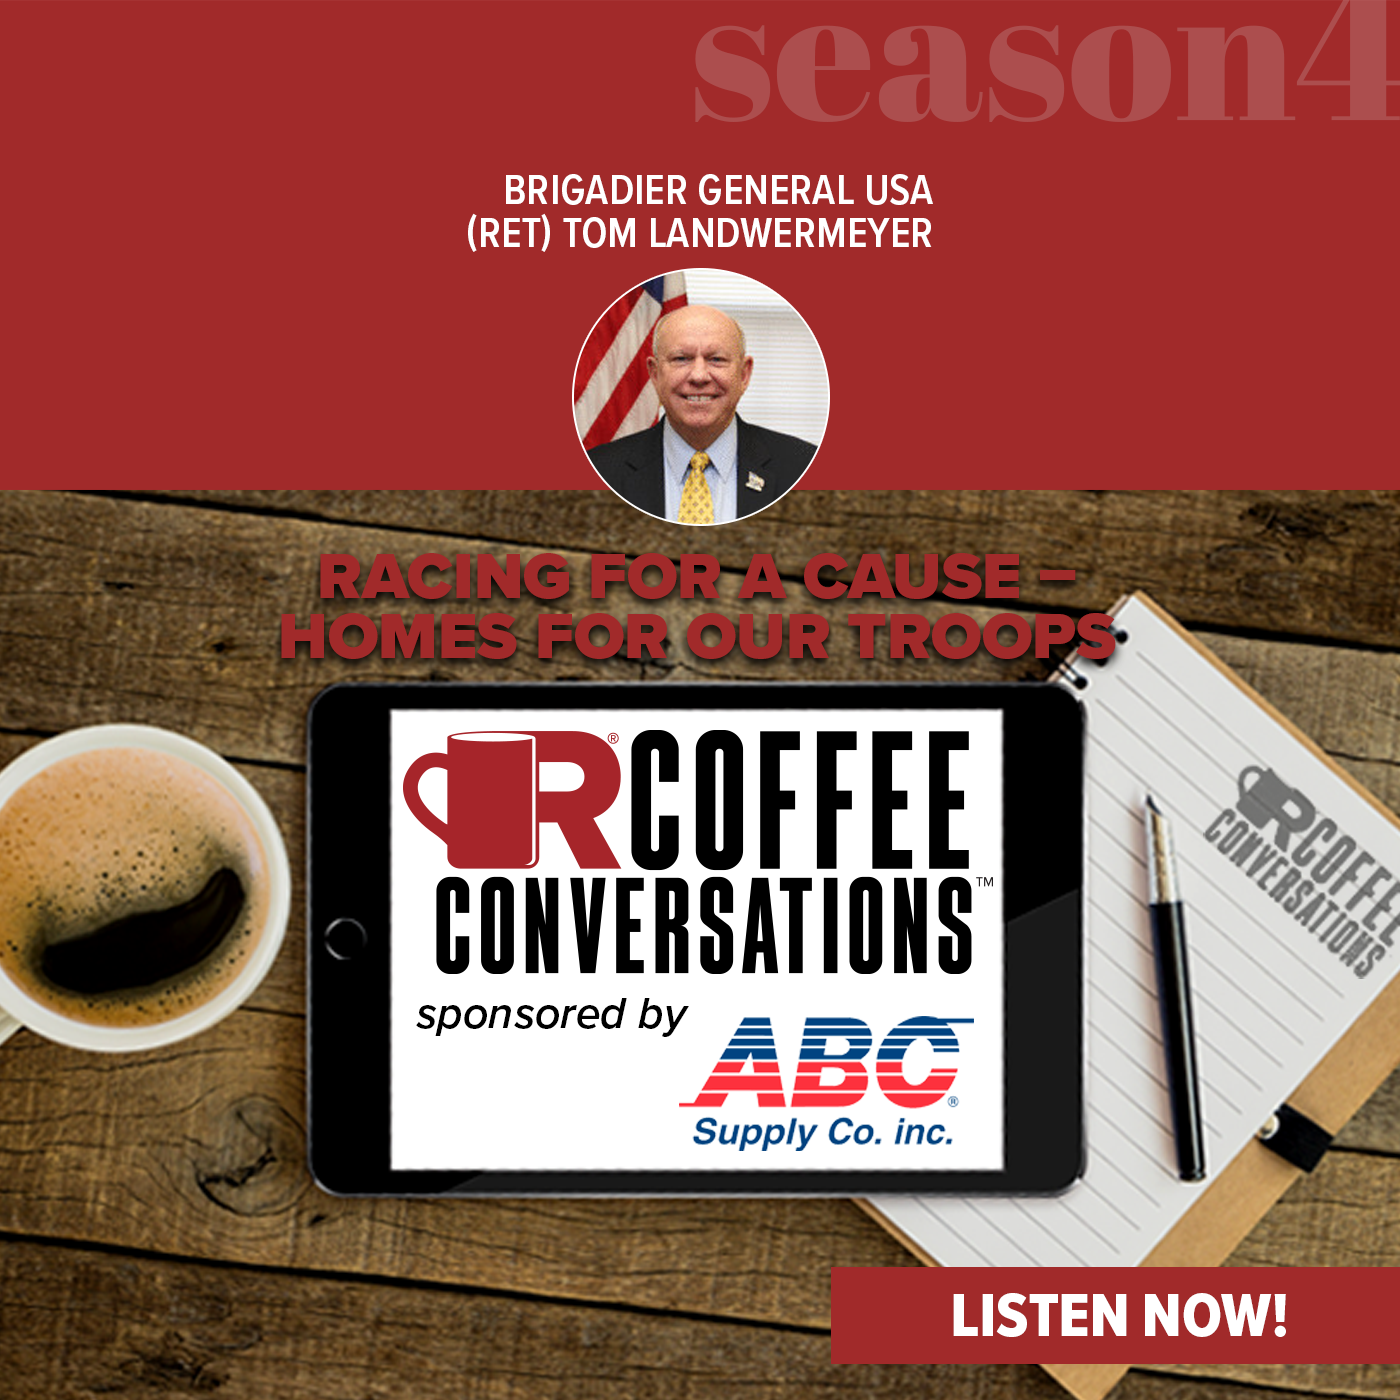 ABC - Coffee Conversations - Racing for a Cause With Homes For Our Troops - POD